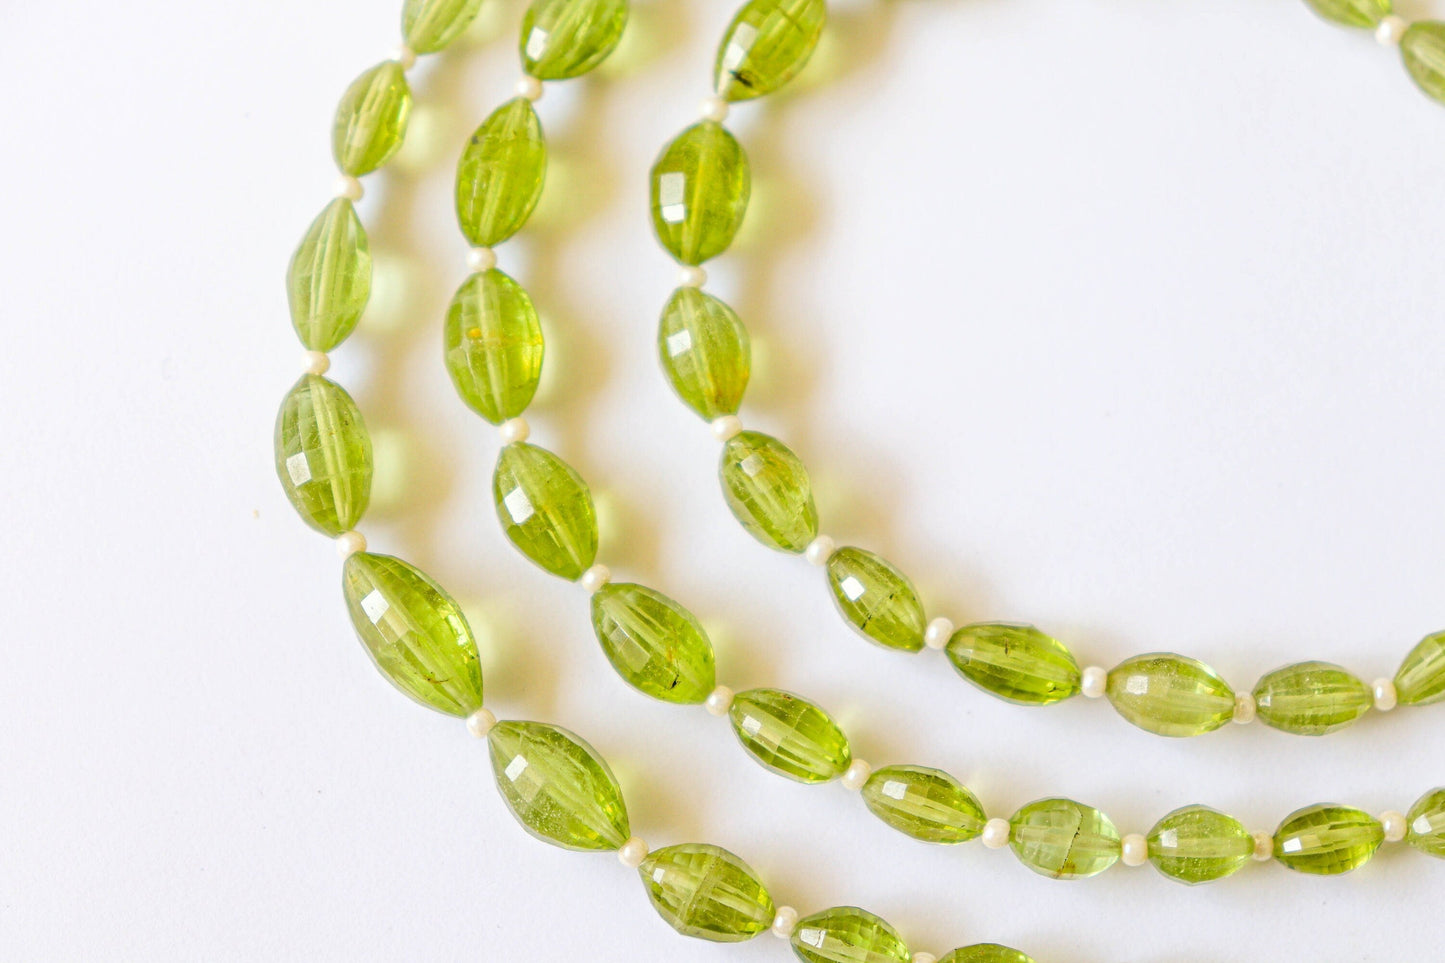 Peridot Oval Shape Step cut beads | 4x5mm to 7x10mm | 8 inch Full String | 19 Pieces | Natural Gemstone | Beadsforyourjewellery Beadsforyourjewelry